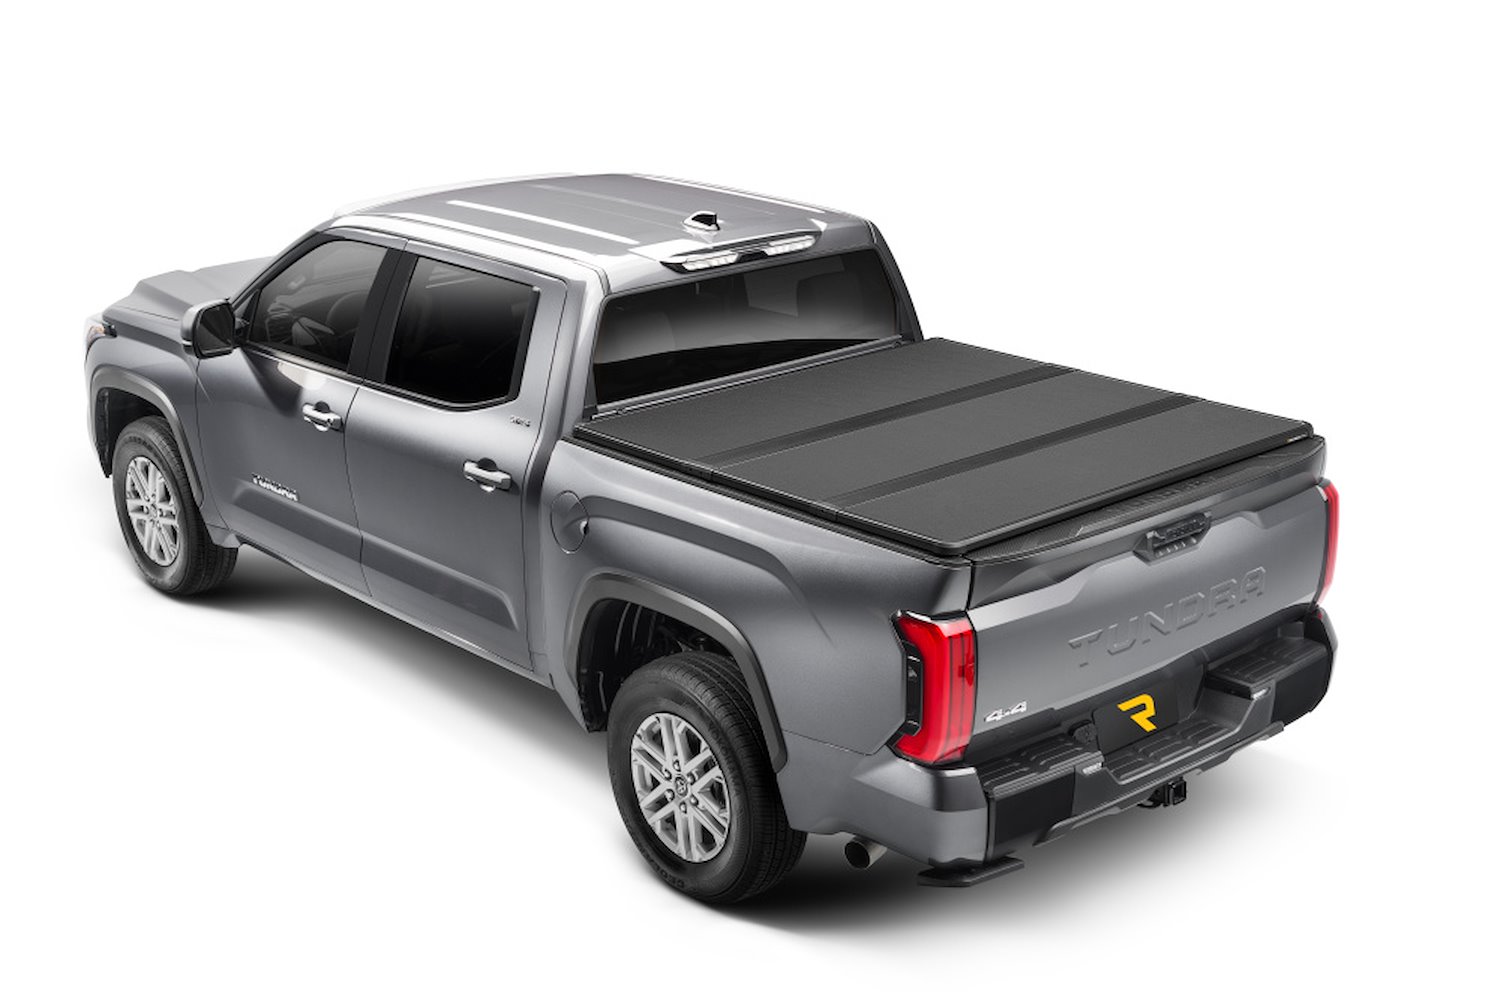 88465 Solid Fold ALX Tonneau Cover for 14-21 Tundra 6 ft.7 in. w/out Deck Rail System